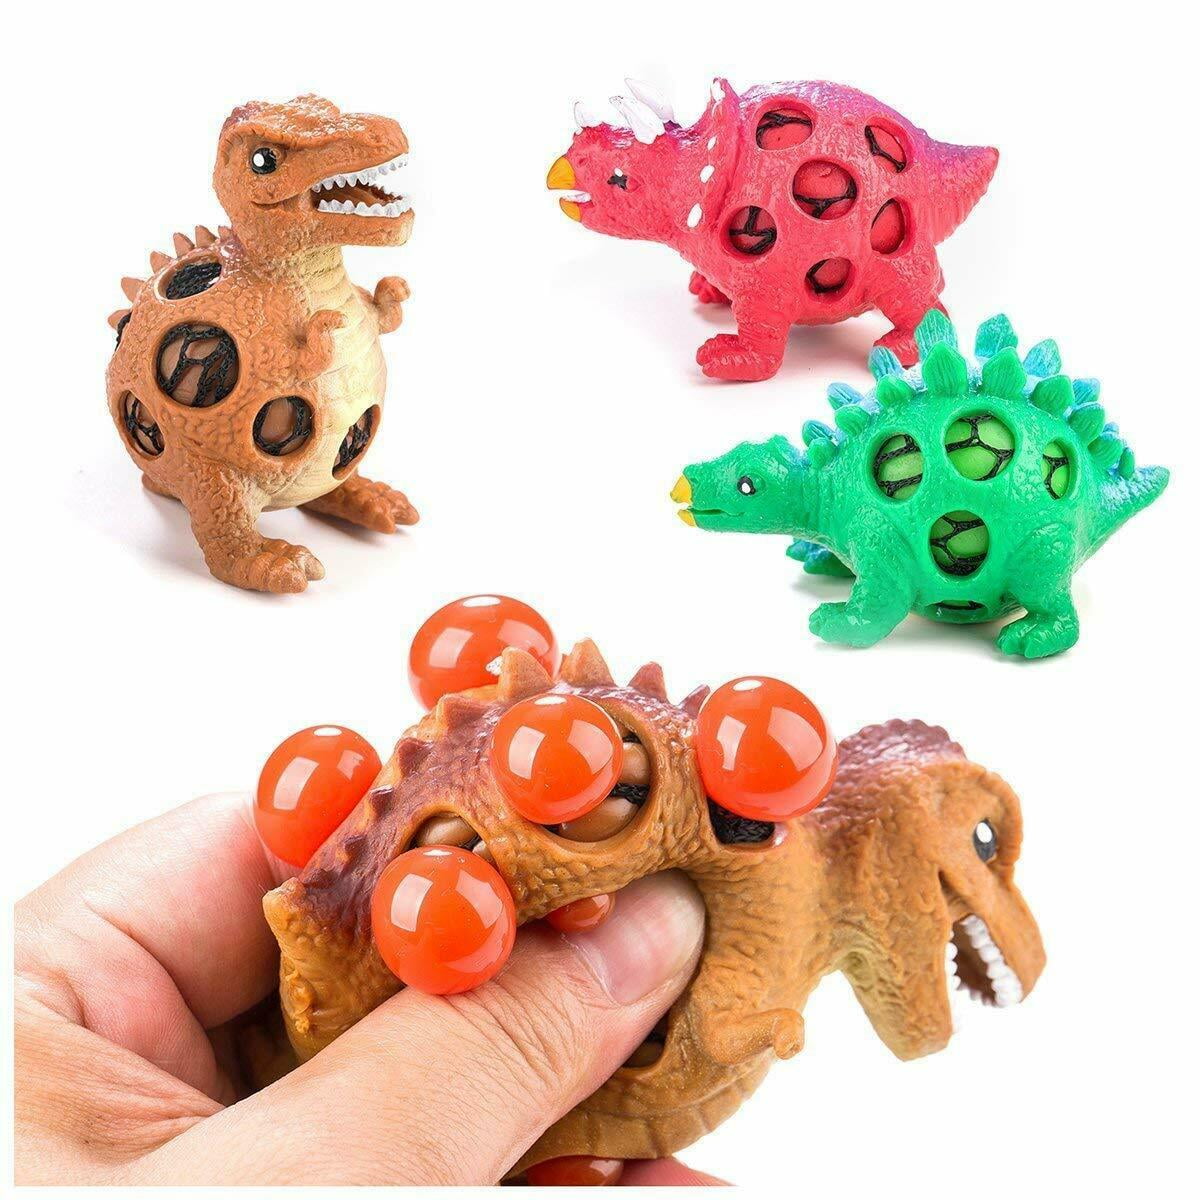 DINOSAUR SQUEEZE BALL hand soft rubber kids interactive learning toys fun stress 